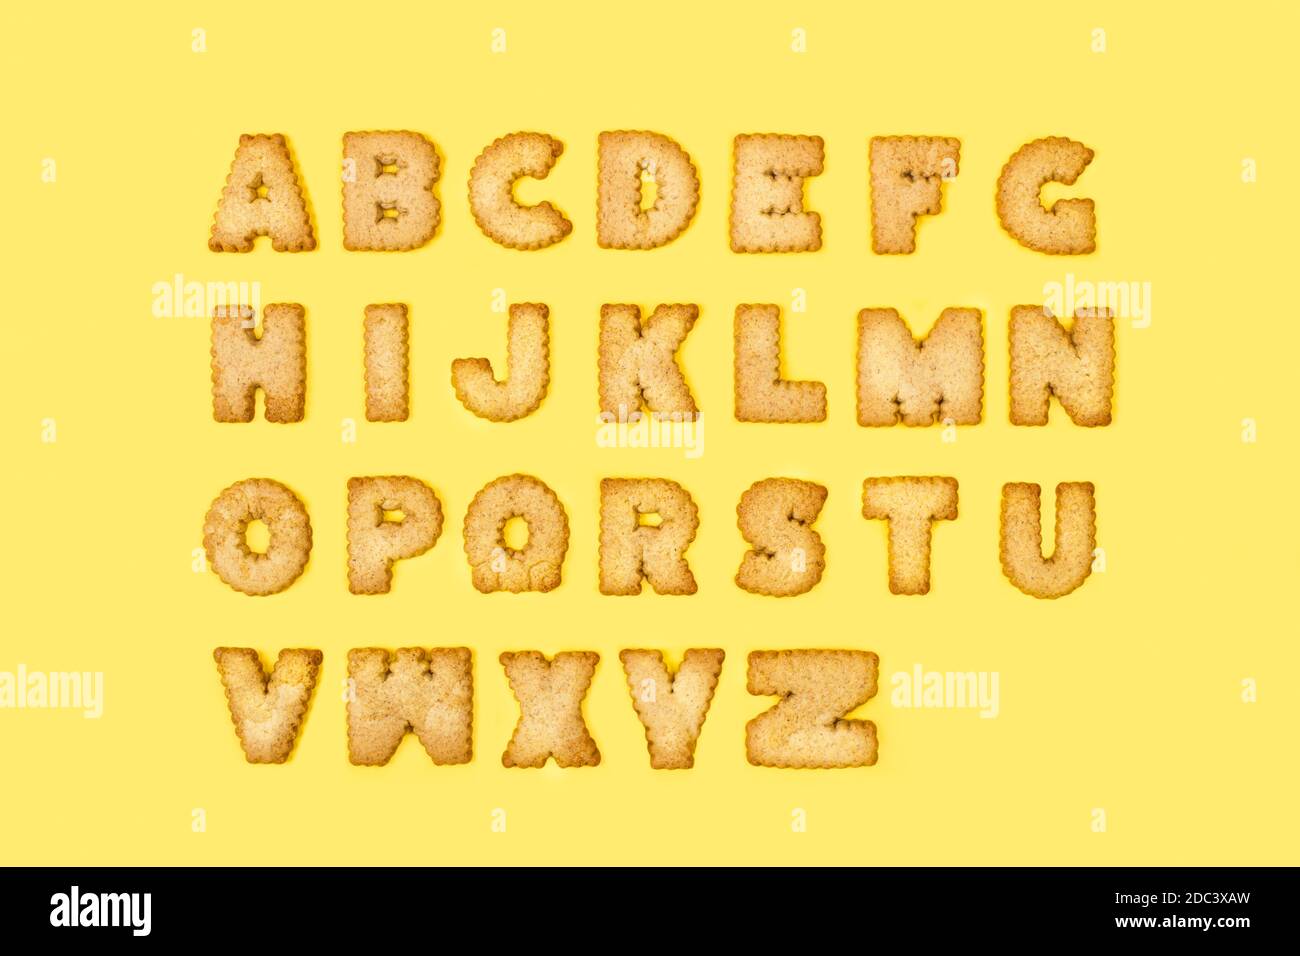 Alphabet Letters Cookies In Alphabetical Order On A Yellow Background Stock Photo Alamy